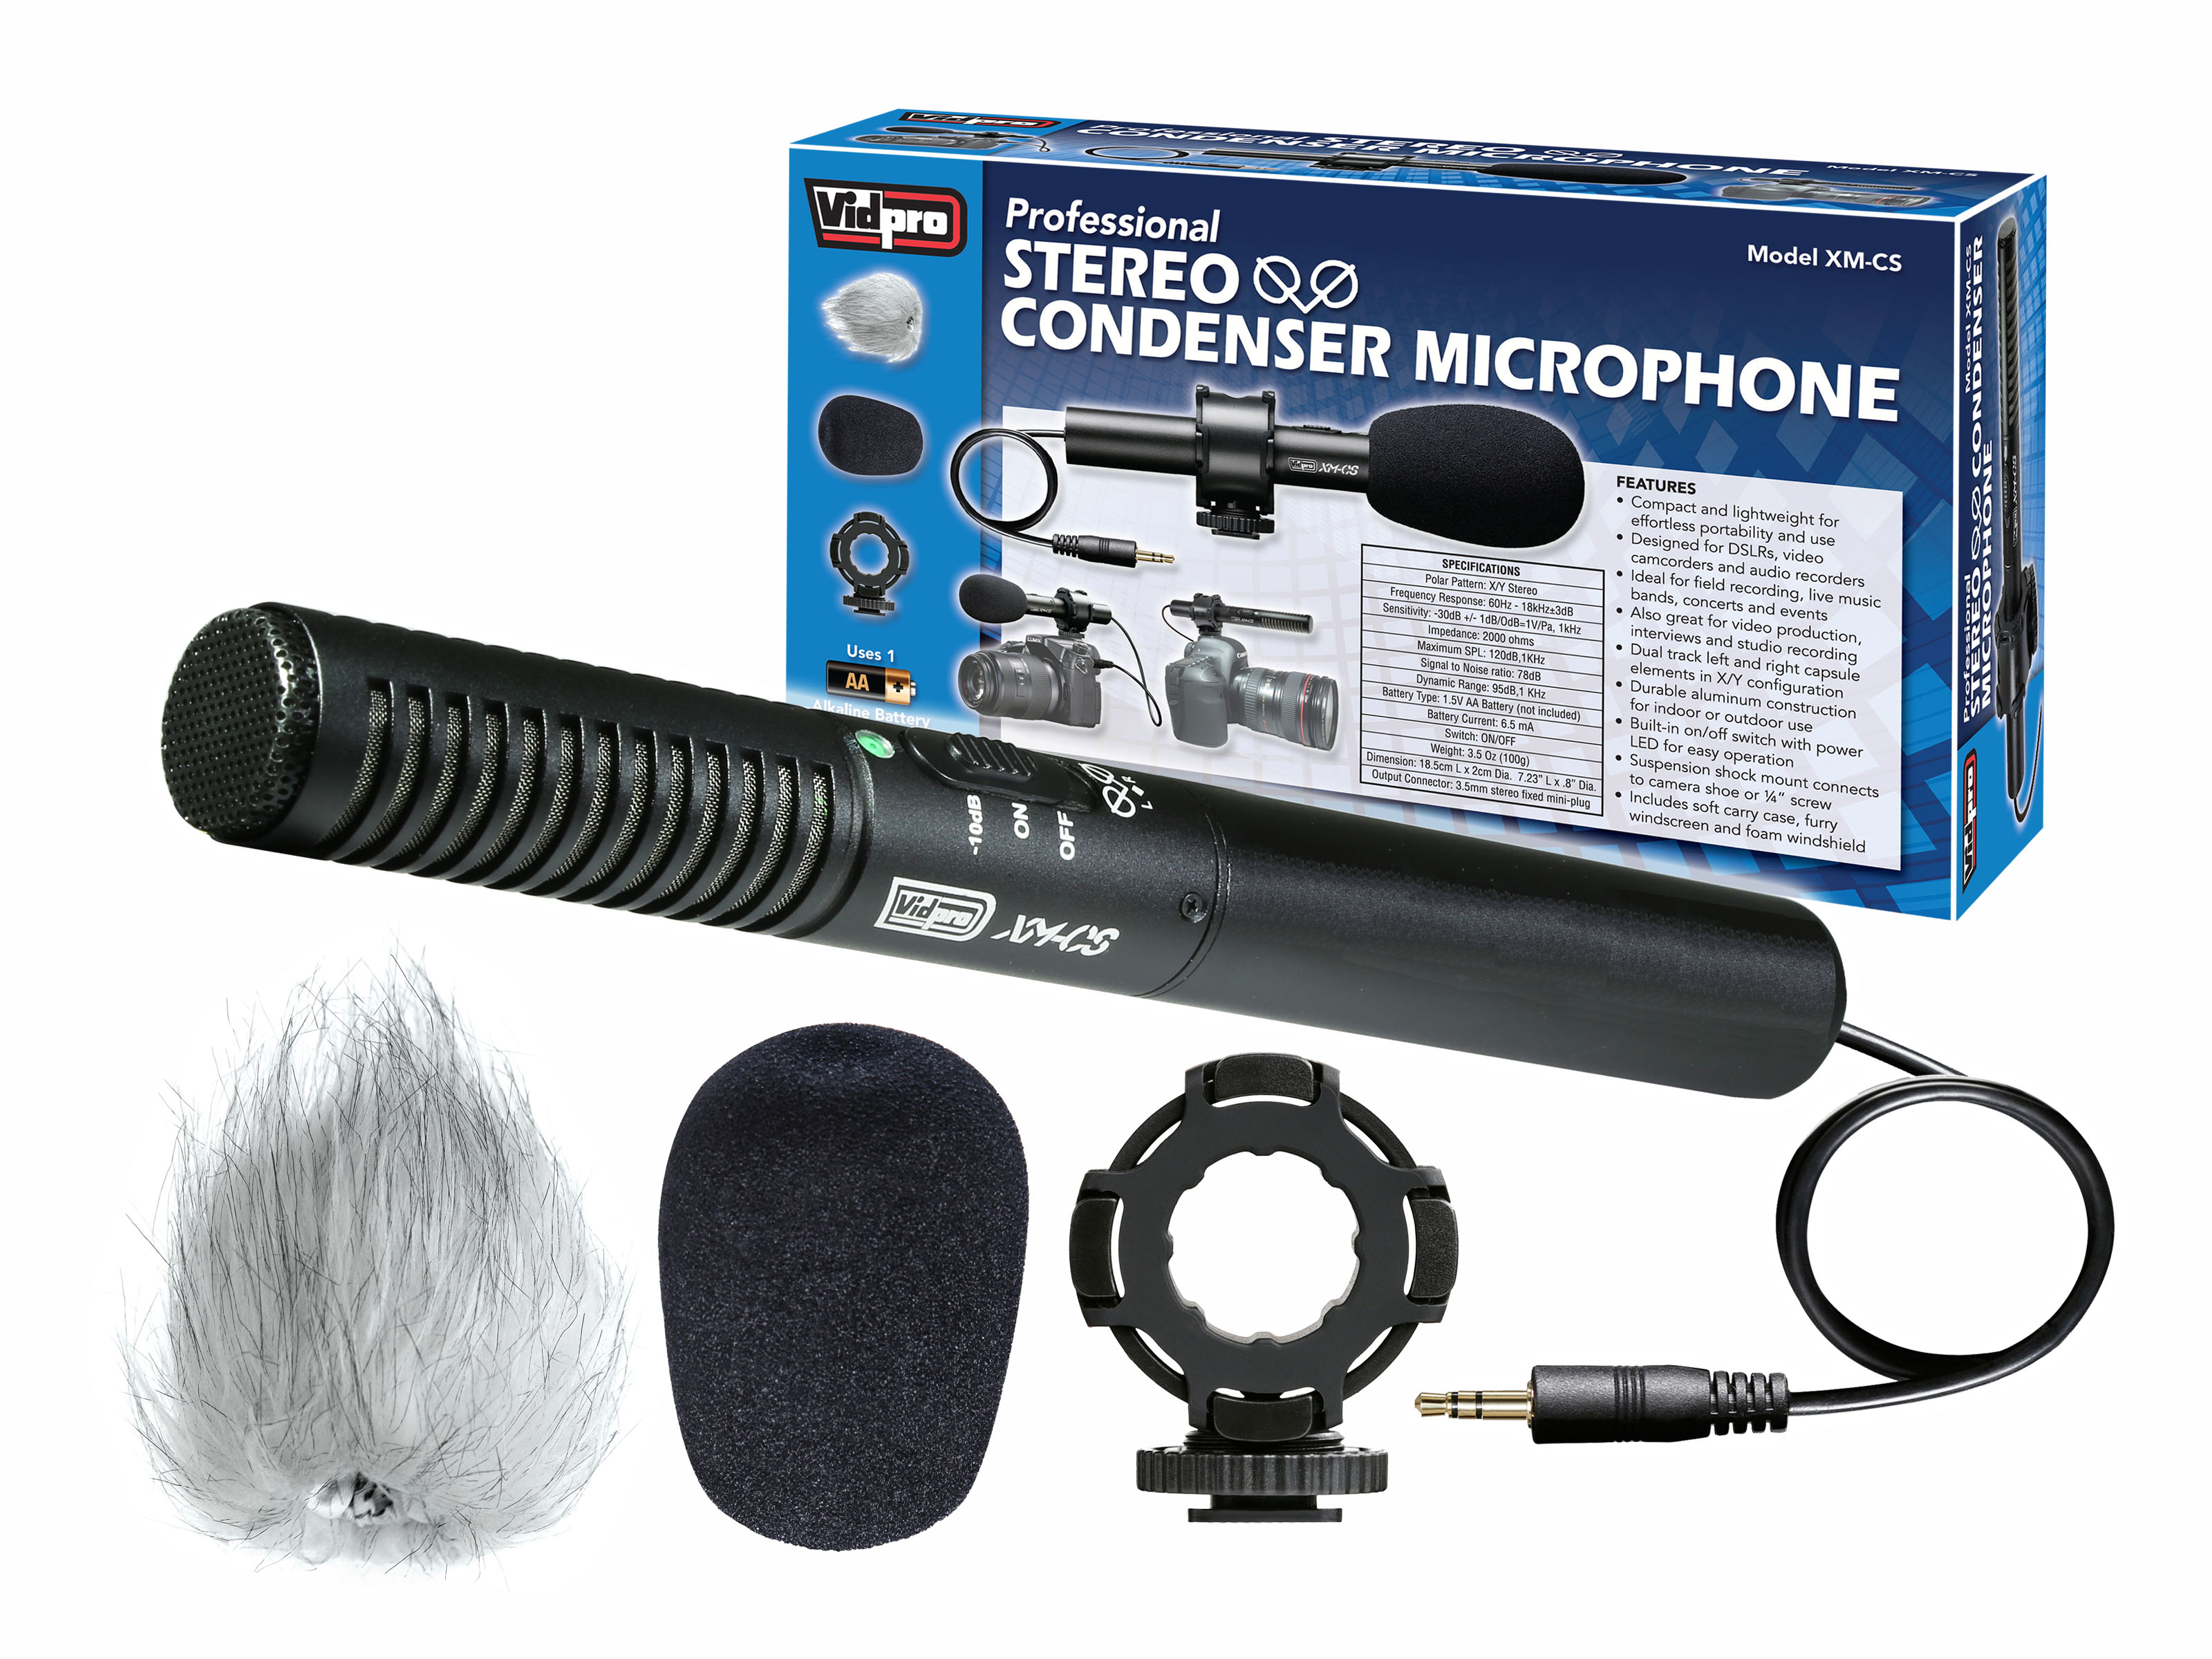 Vidpro XM-CS Condenser Stereo XY Microphone Kit  for DSLRs, video camcorders and audio recorders